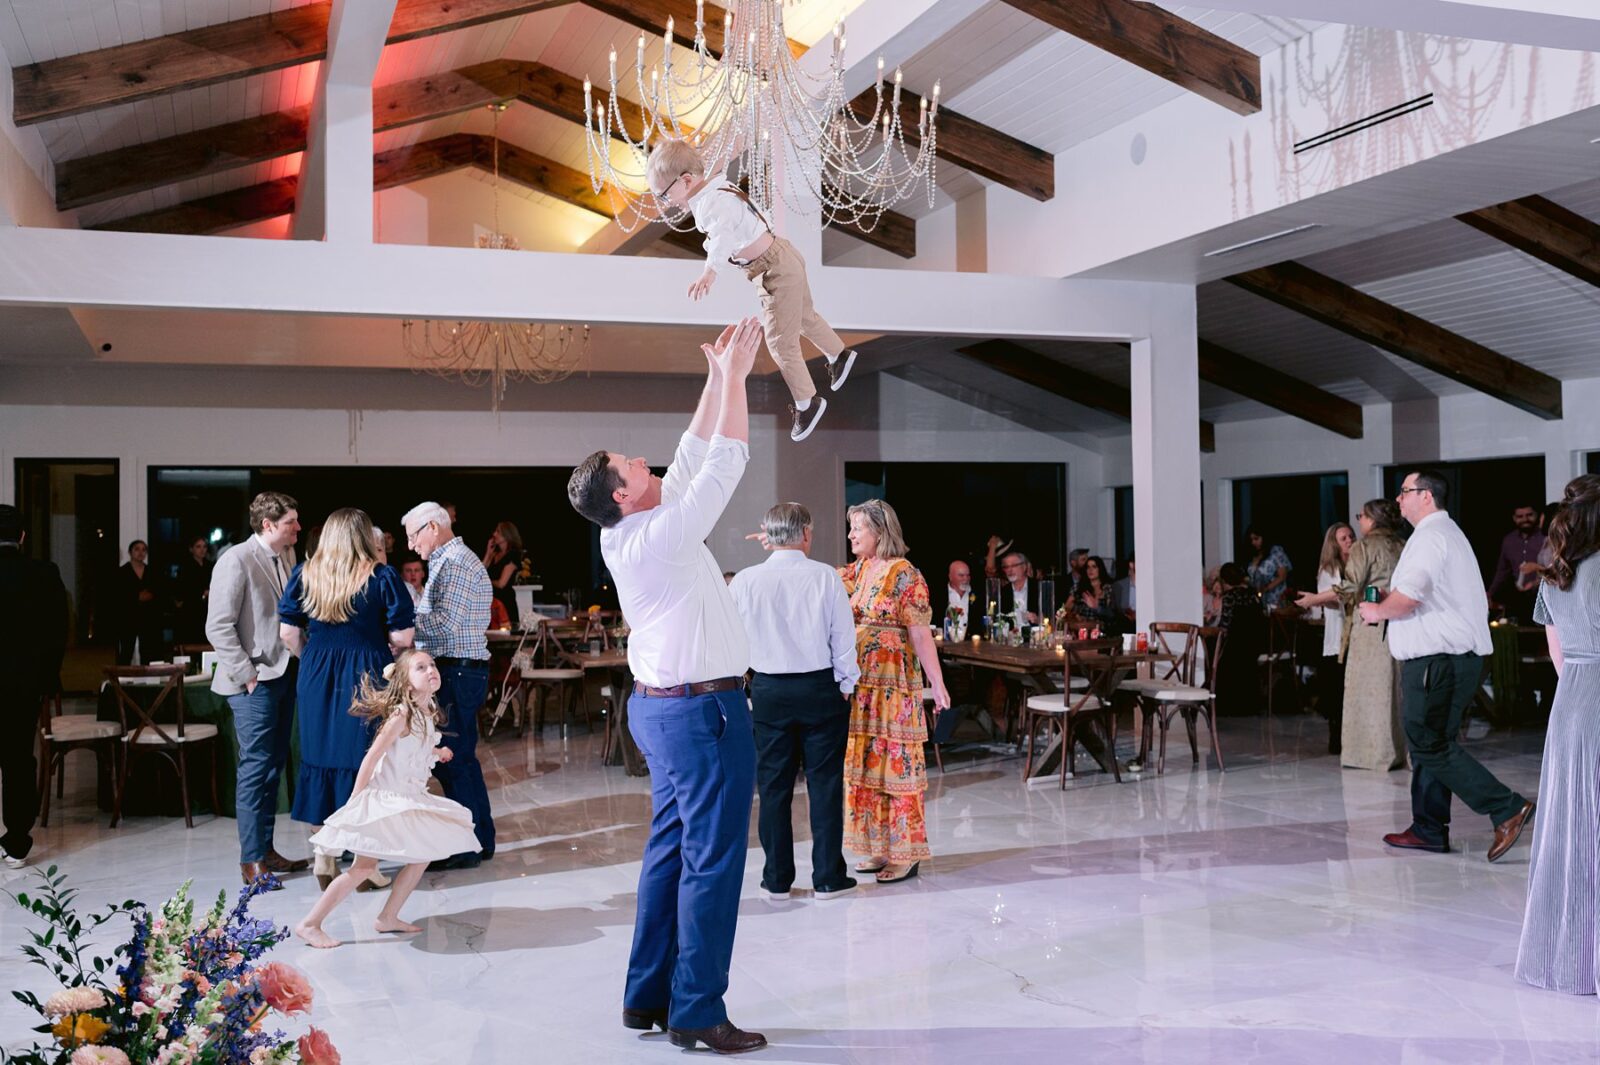 groom throwing ring bearer in the air, reception dancing, guests dancing at wedding, videre estate reception space, wedding at the videre estate venue, wimberley, 